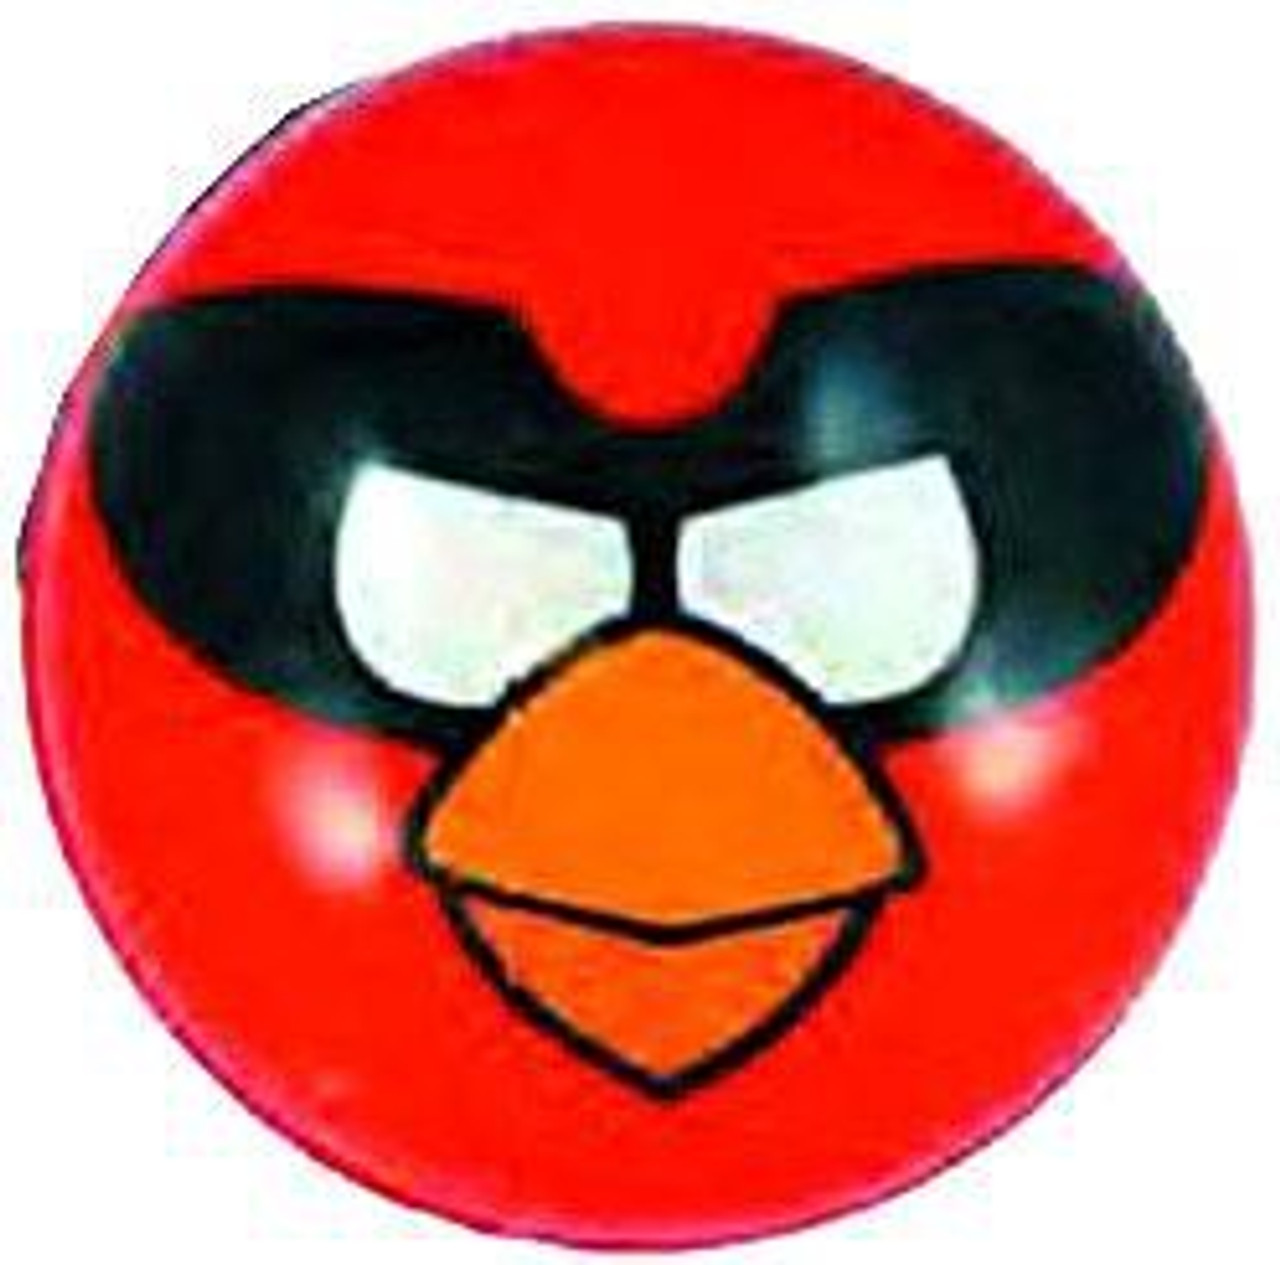 Angry Birds Space Super Red Bird 2 Foam Ball Commonwealth Toys Toywiz - red bird in a bag angry birds roblox